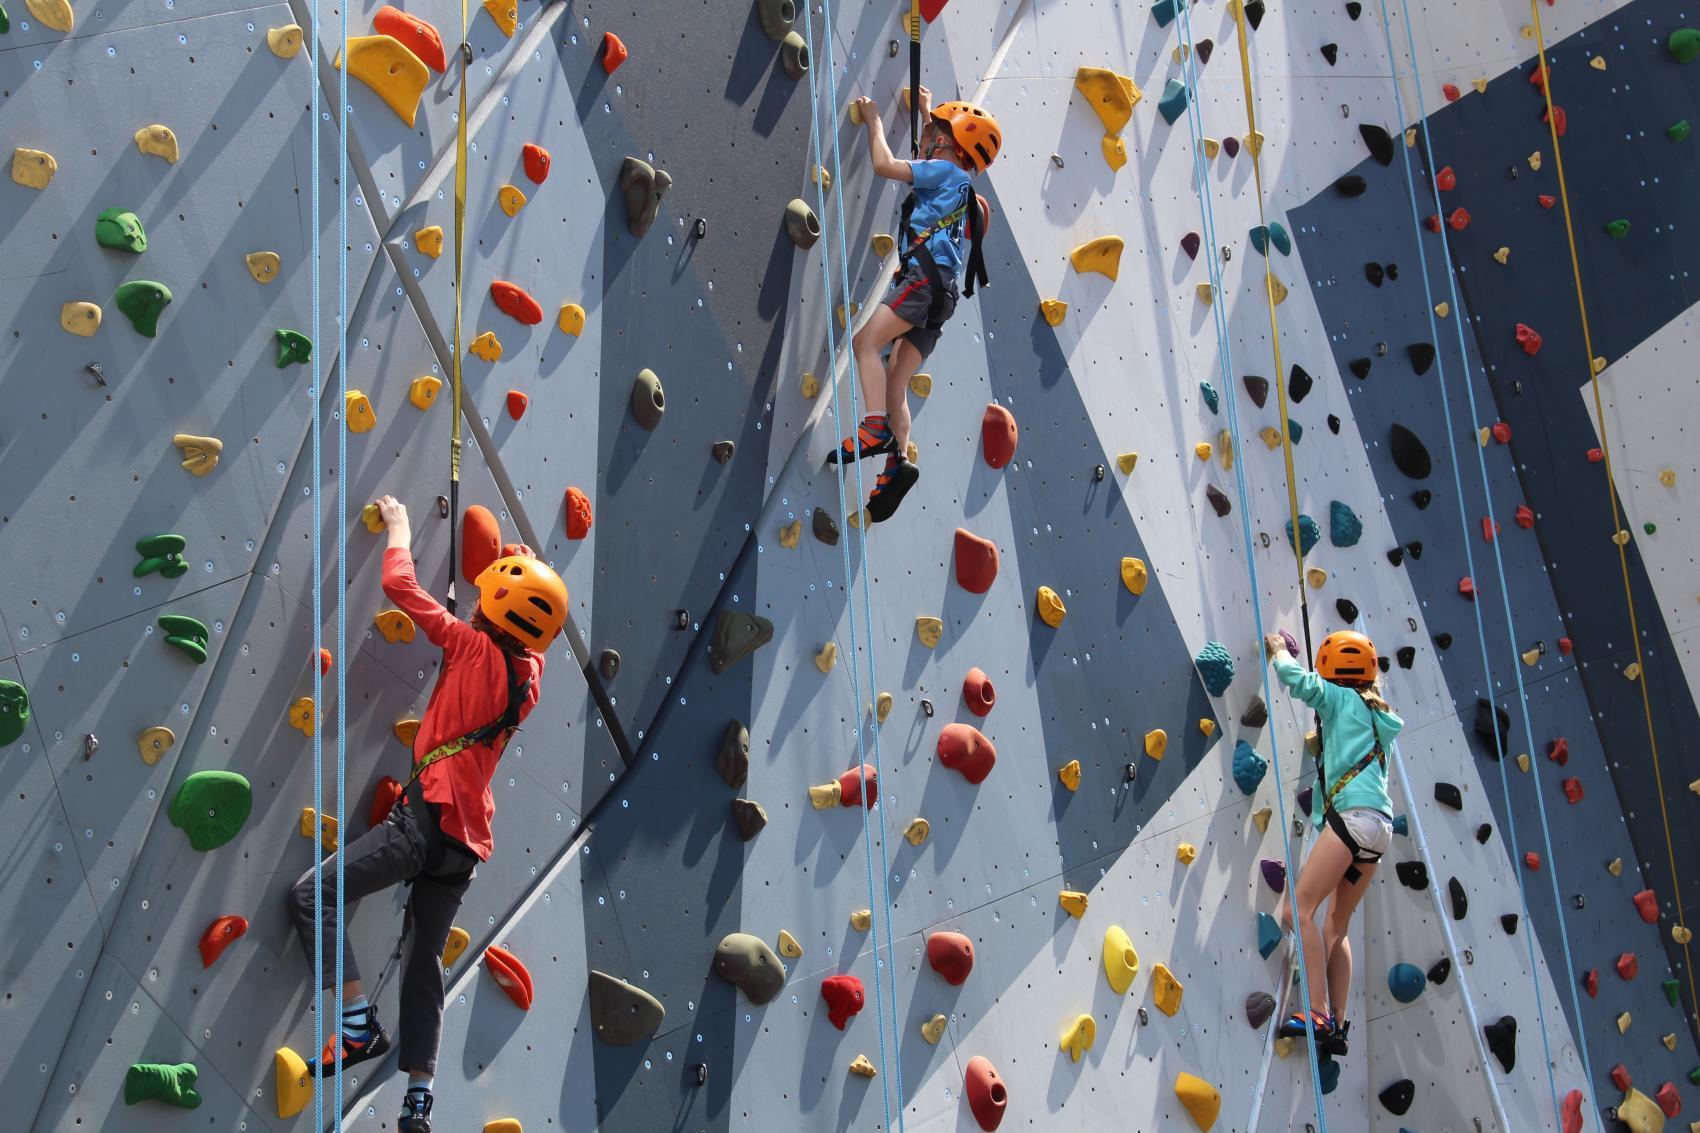 The Climbing Wall at Maggie Daley Park can hold up to 100 climbers at any given time. (Courtesy Chicago Park District)